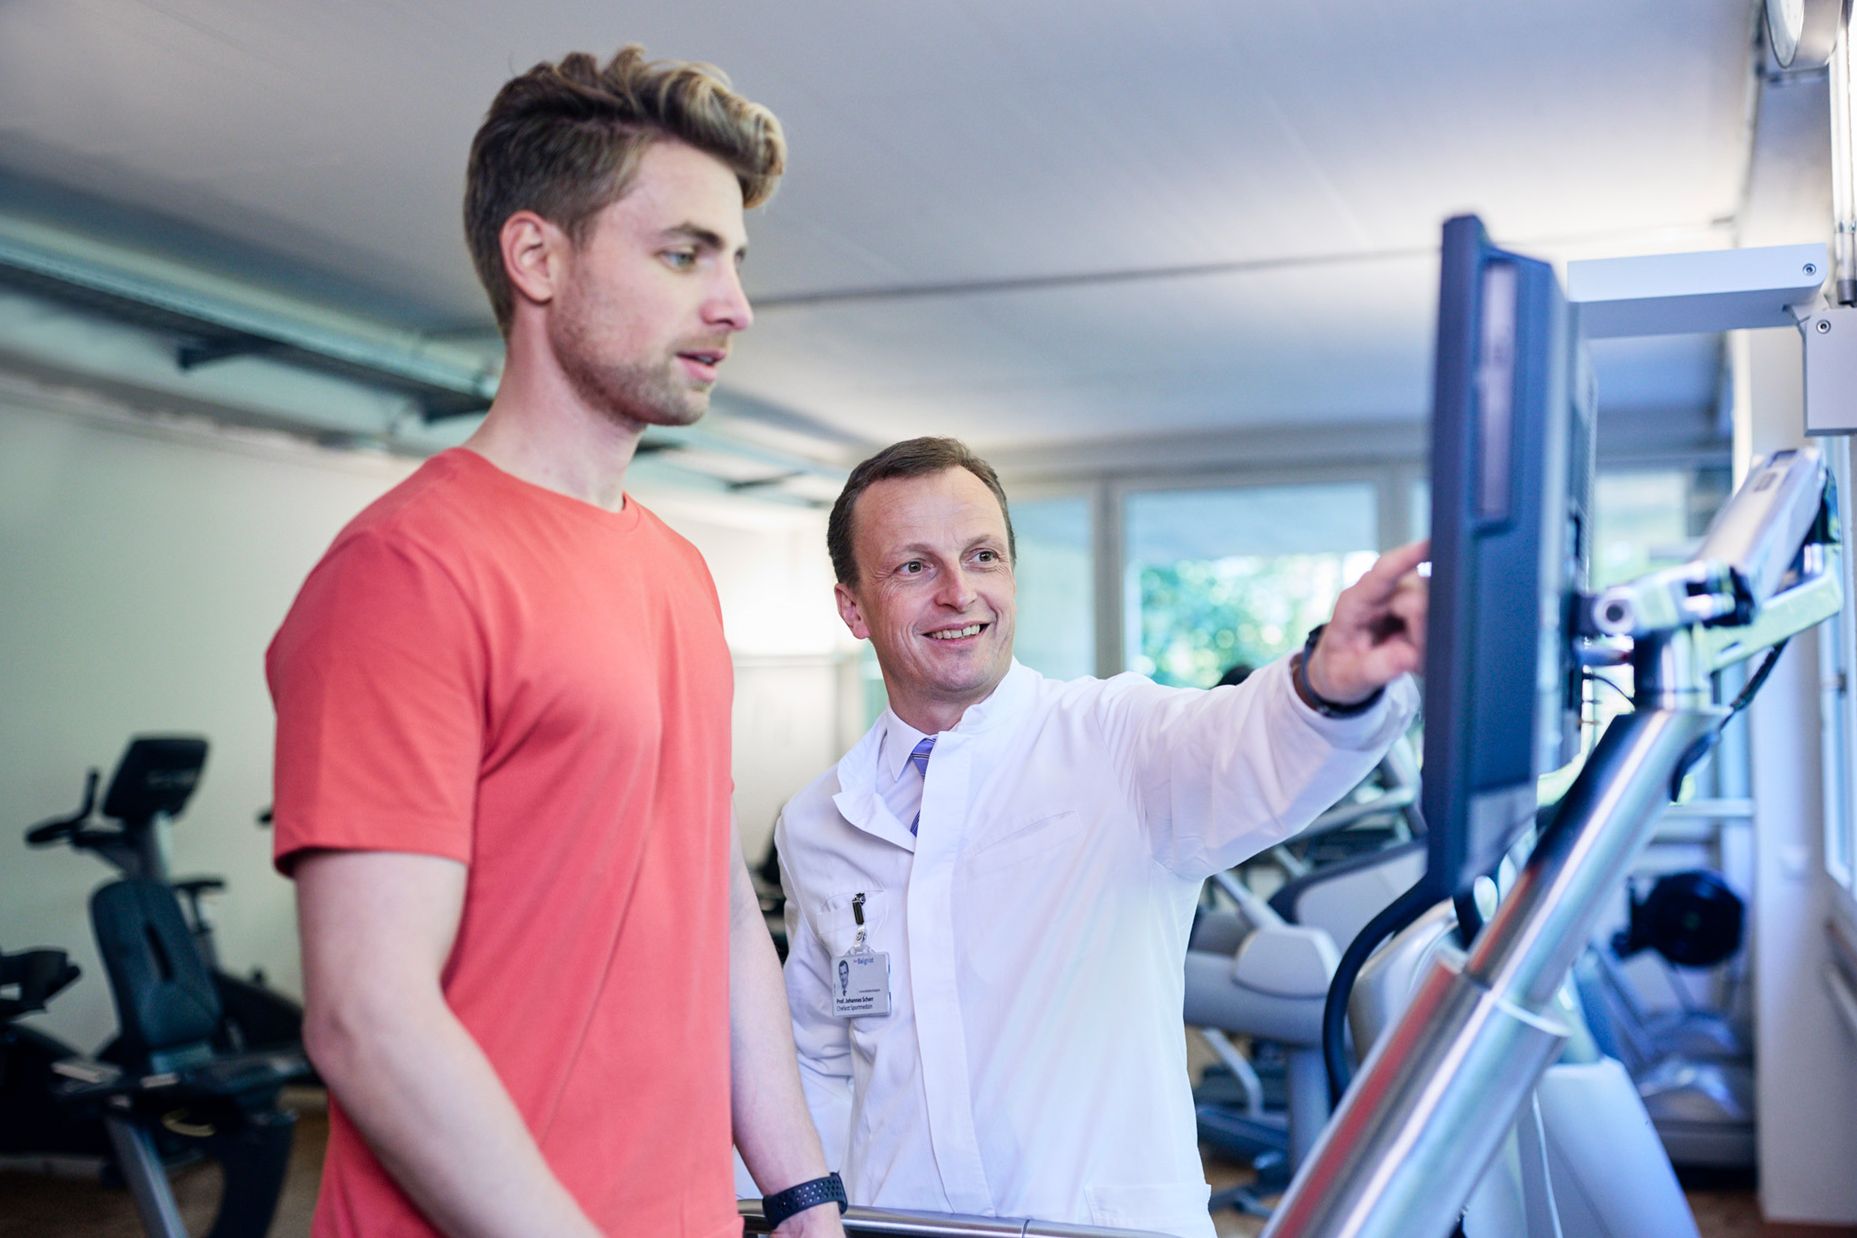 Patient in sports medicine is cared for on the treadmill by the sports doctor.